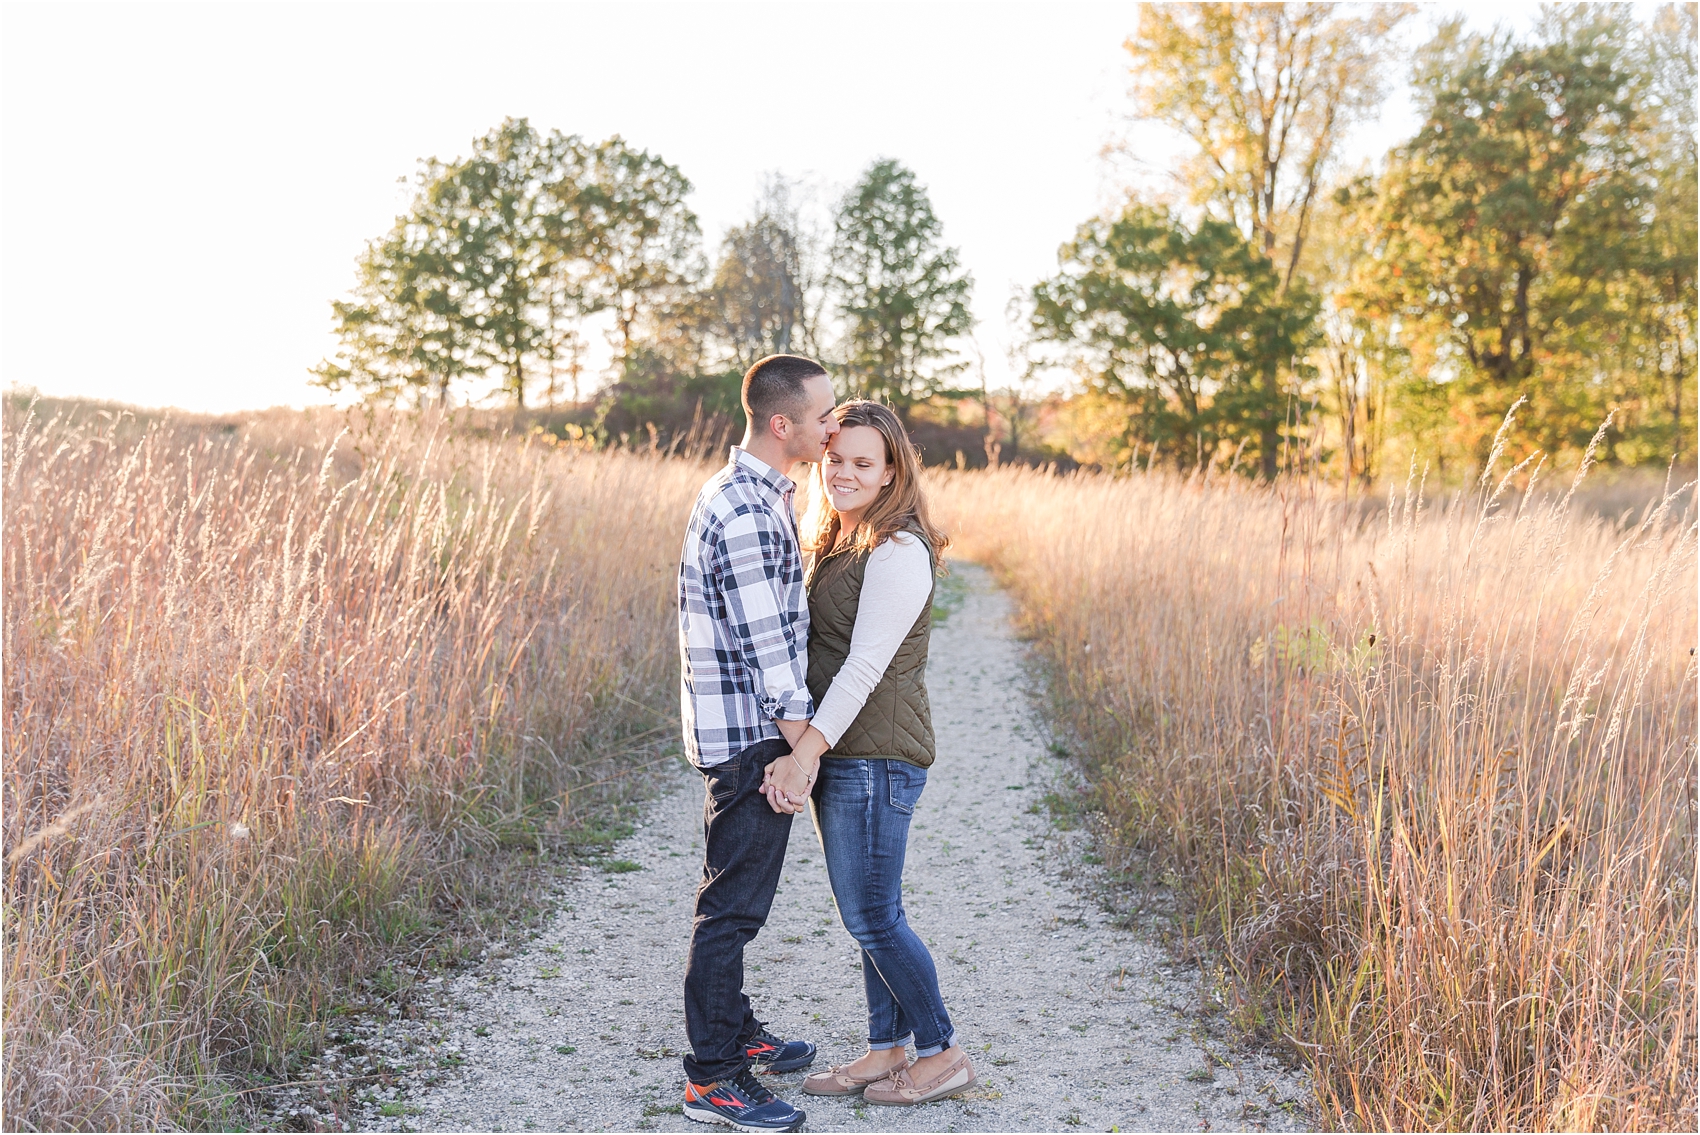 romantic-fall-engagement-photos-at-indian-springs-metropark-in-clarkston-mi-by-courtney-carolyn-photography_0015.jpg